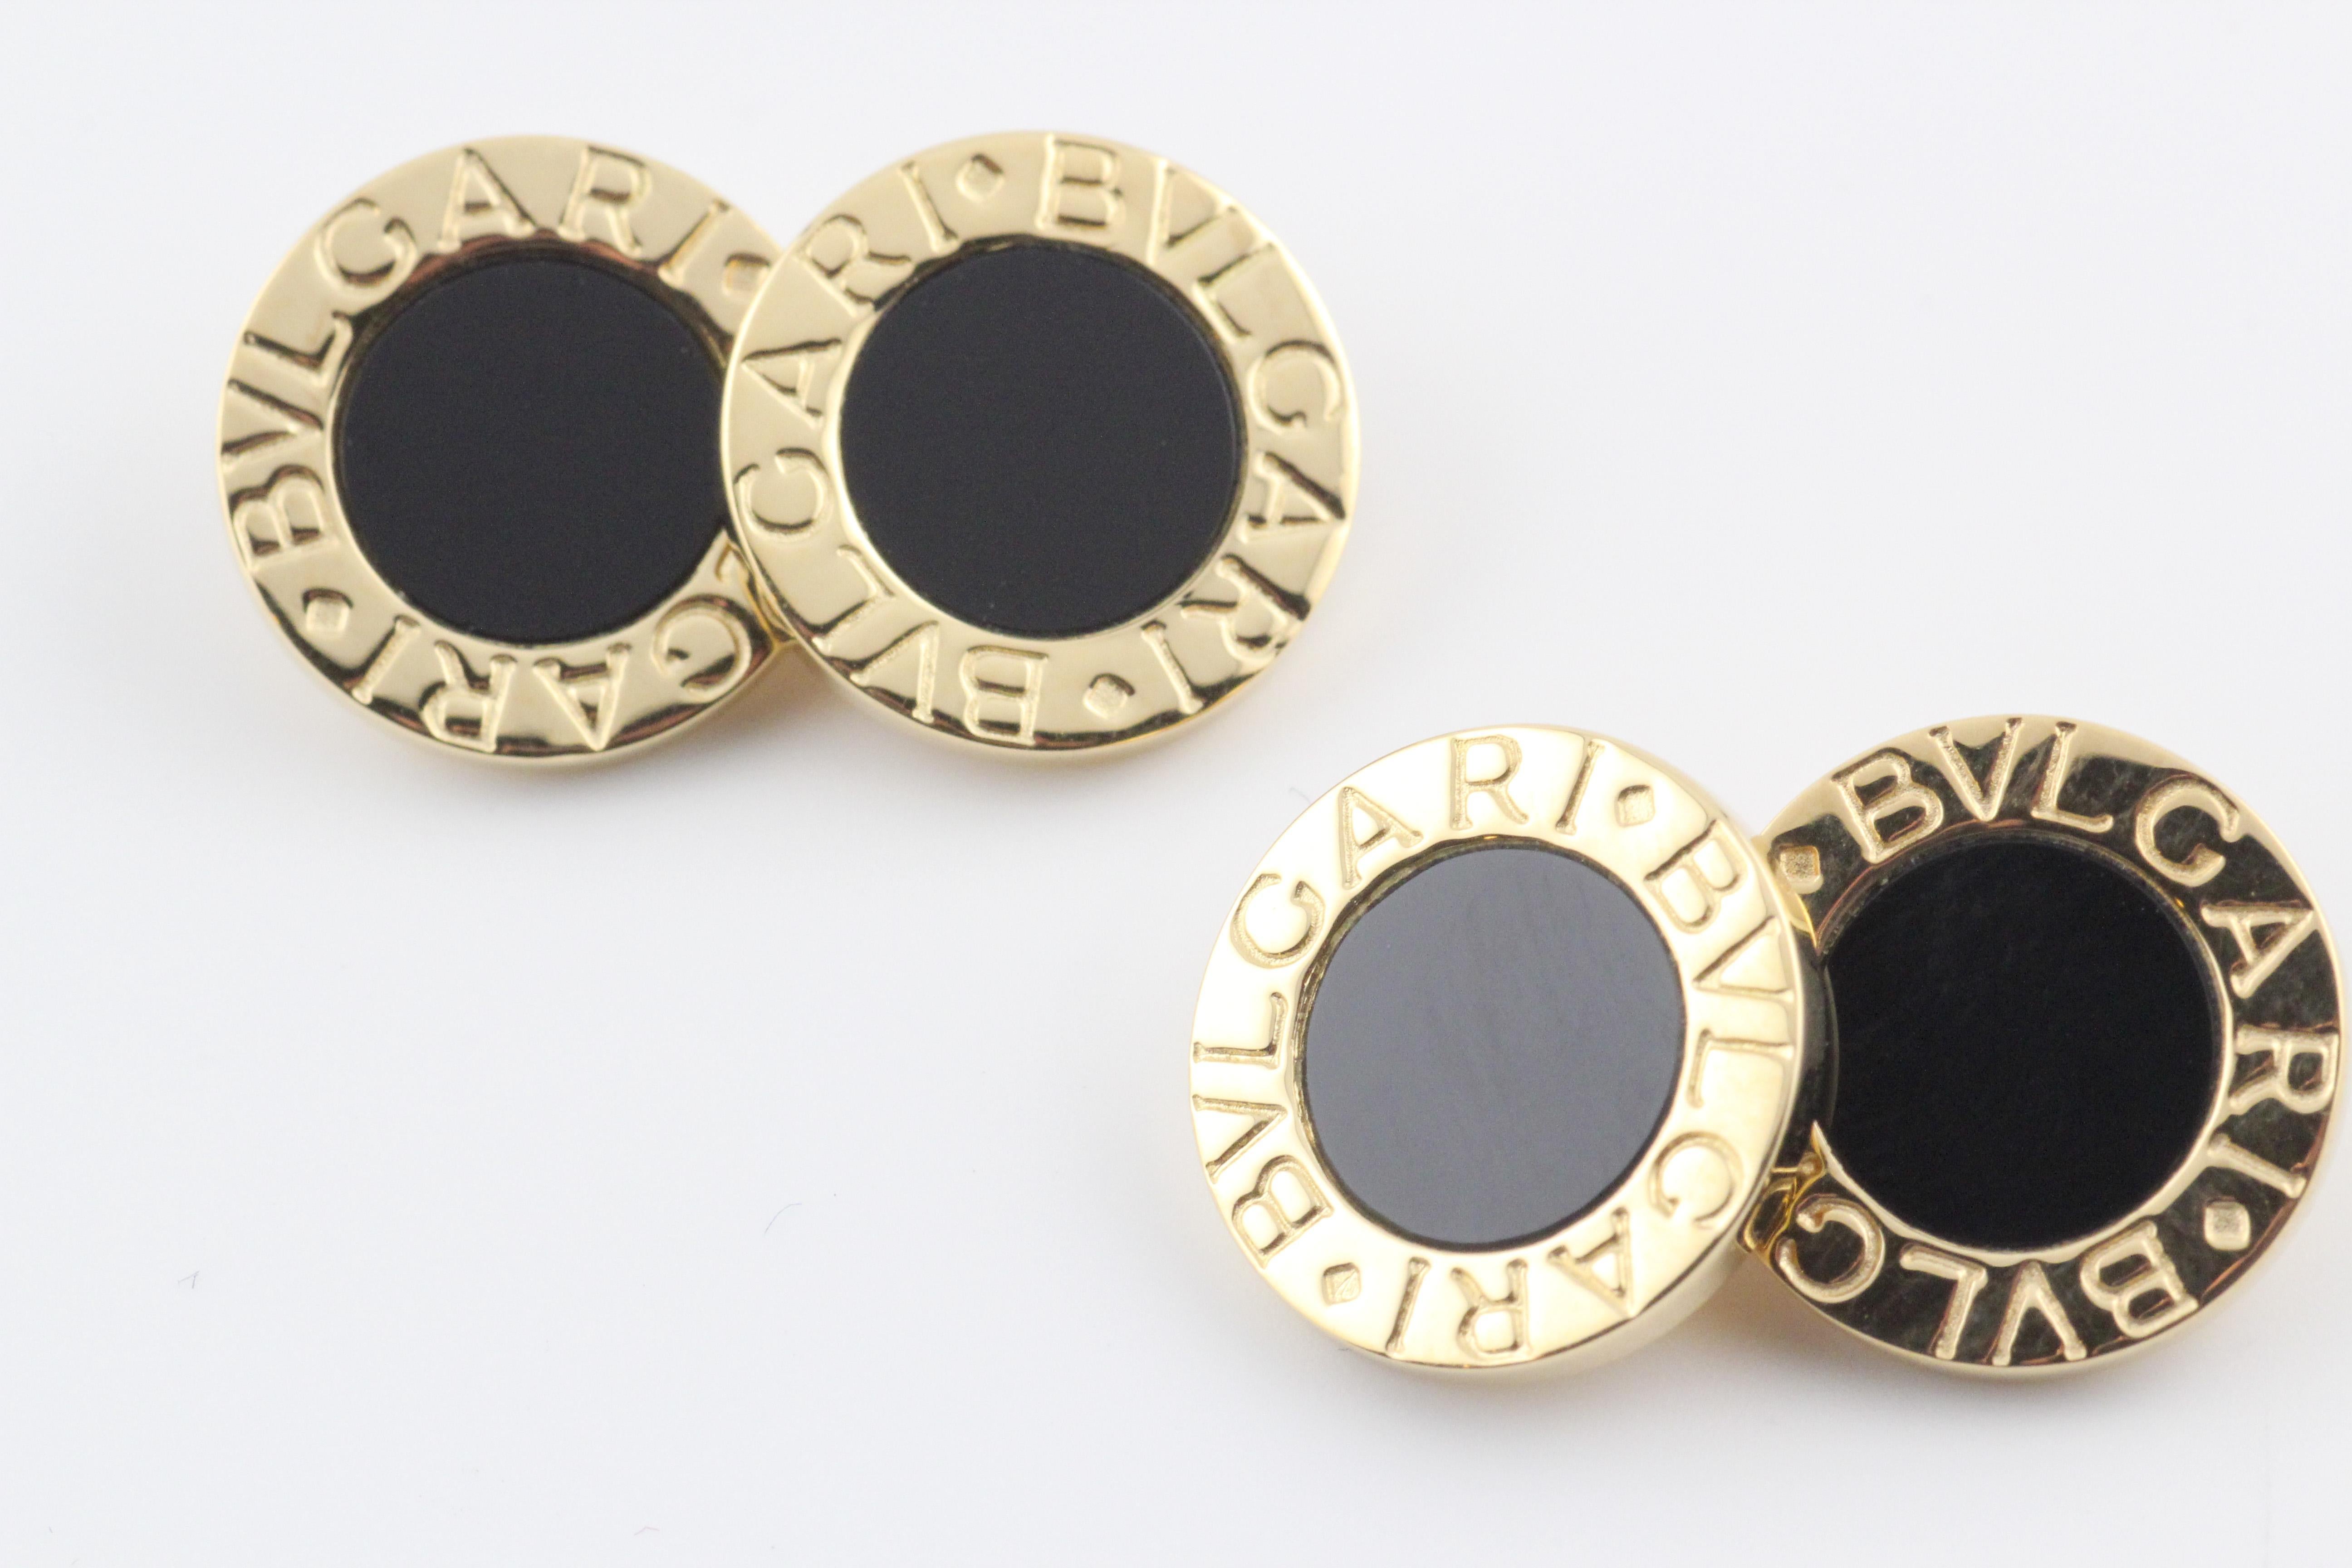 The Bulgari Bulgari Onyx 18k Gold Cufflinks and 4 Studs Set is a testament to the brand's commitment to luxury, sophistication, and timeless design. Bulgari, known for its exceptional craftsmanship and distinctive aesthetic, brings a touch of